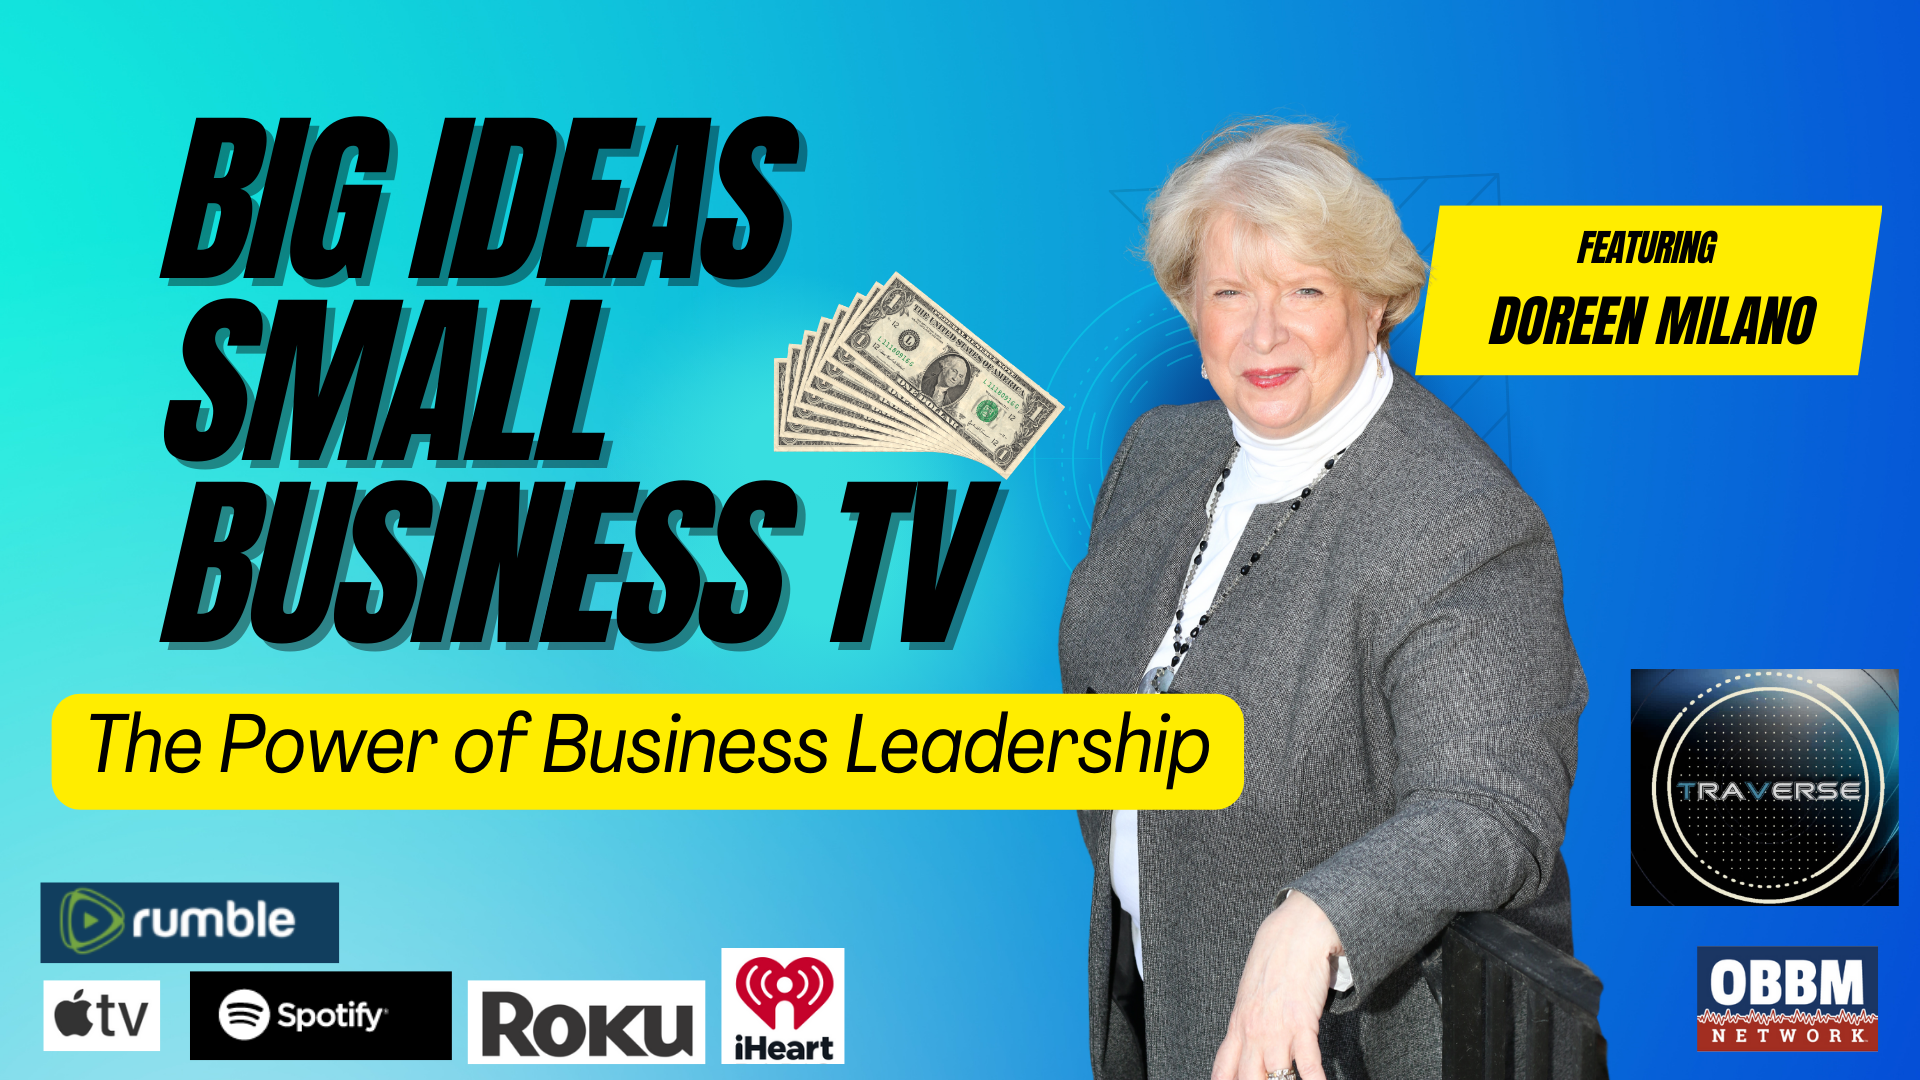 BISB34-The Power of Business Leadership - Big Ideas, Small Business TV